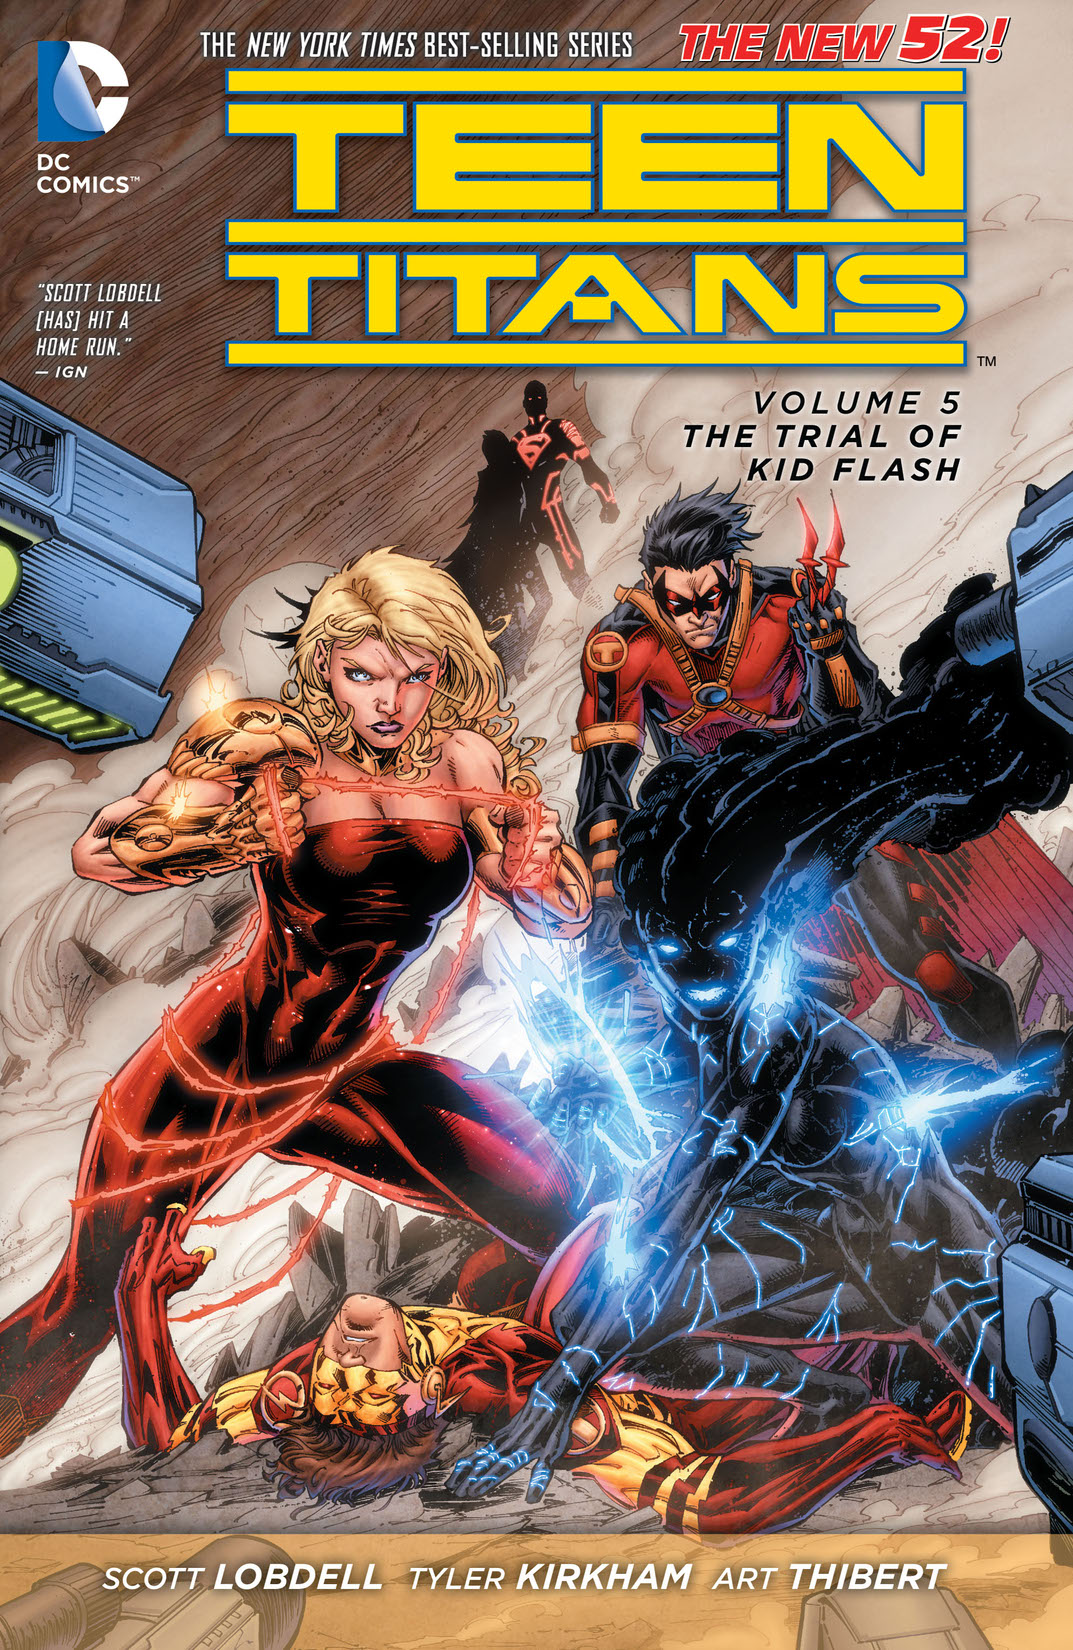 Teen Titans Vol. 5: The Trial of Kid Flash preview images